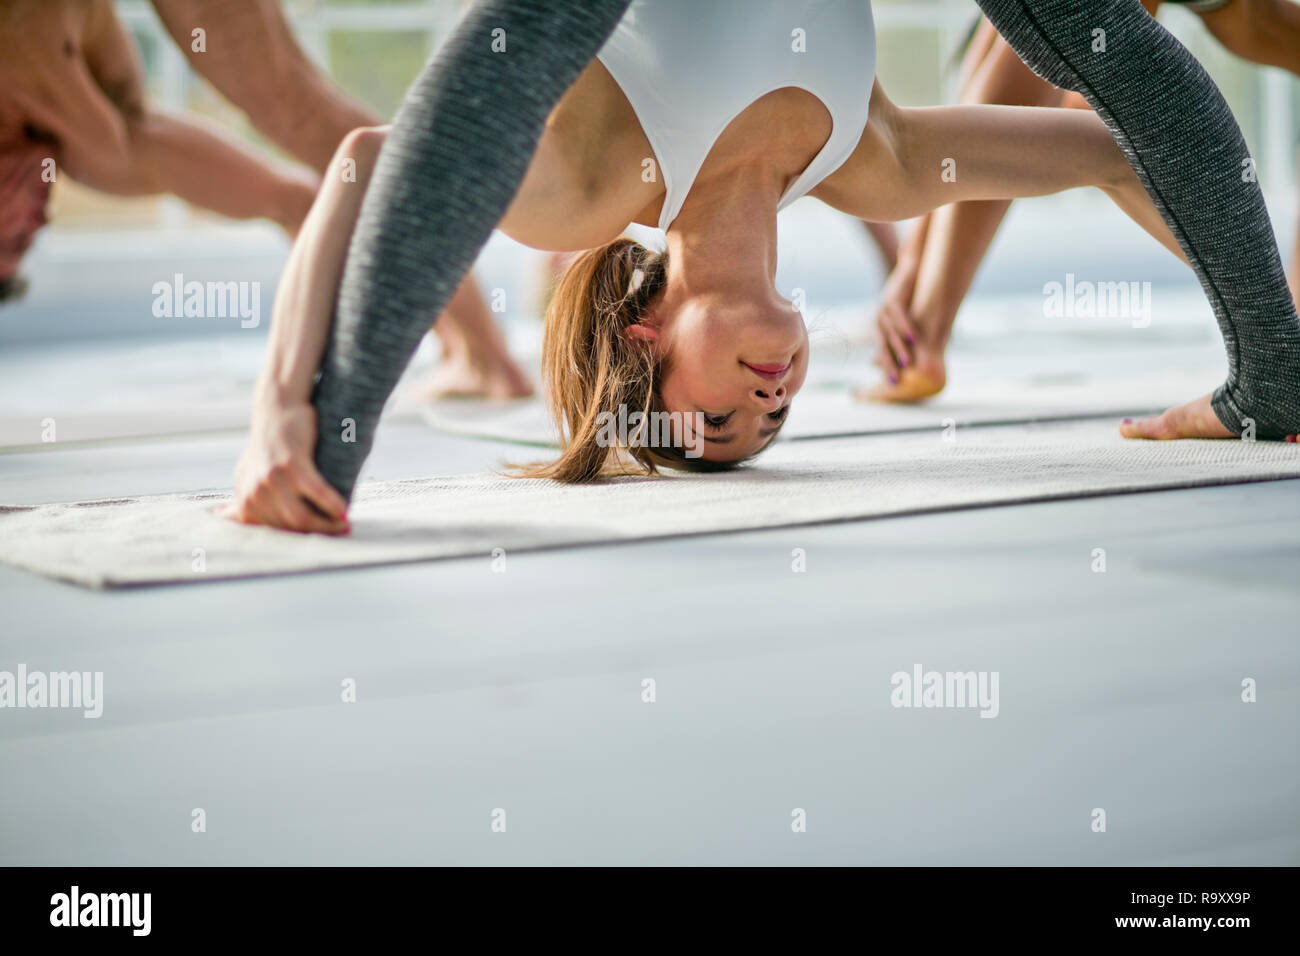 Young woman bending over during a yoga class. Stock Photo